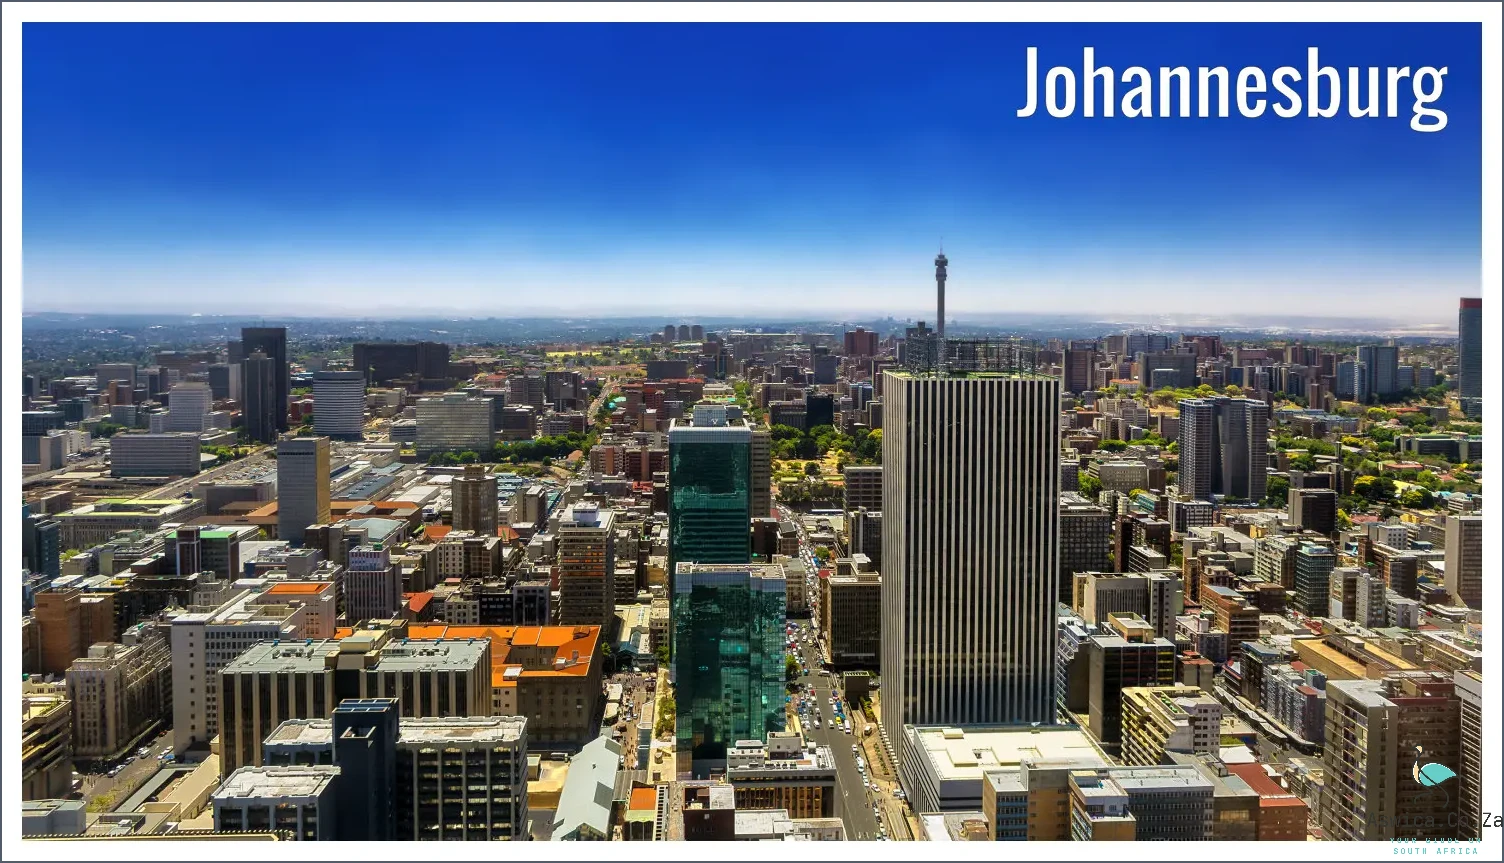 November Weather in Johannesburg: What to Expect!